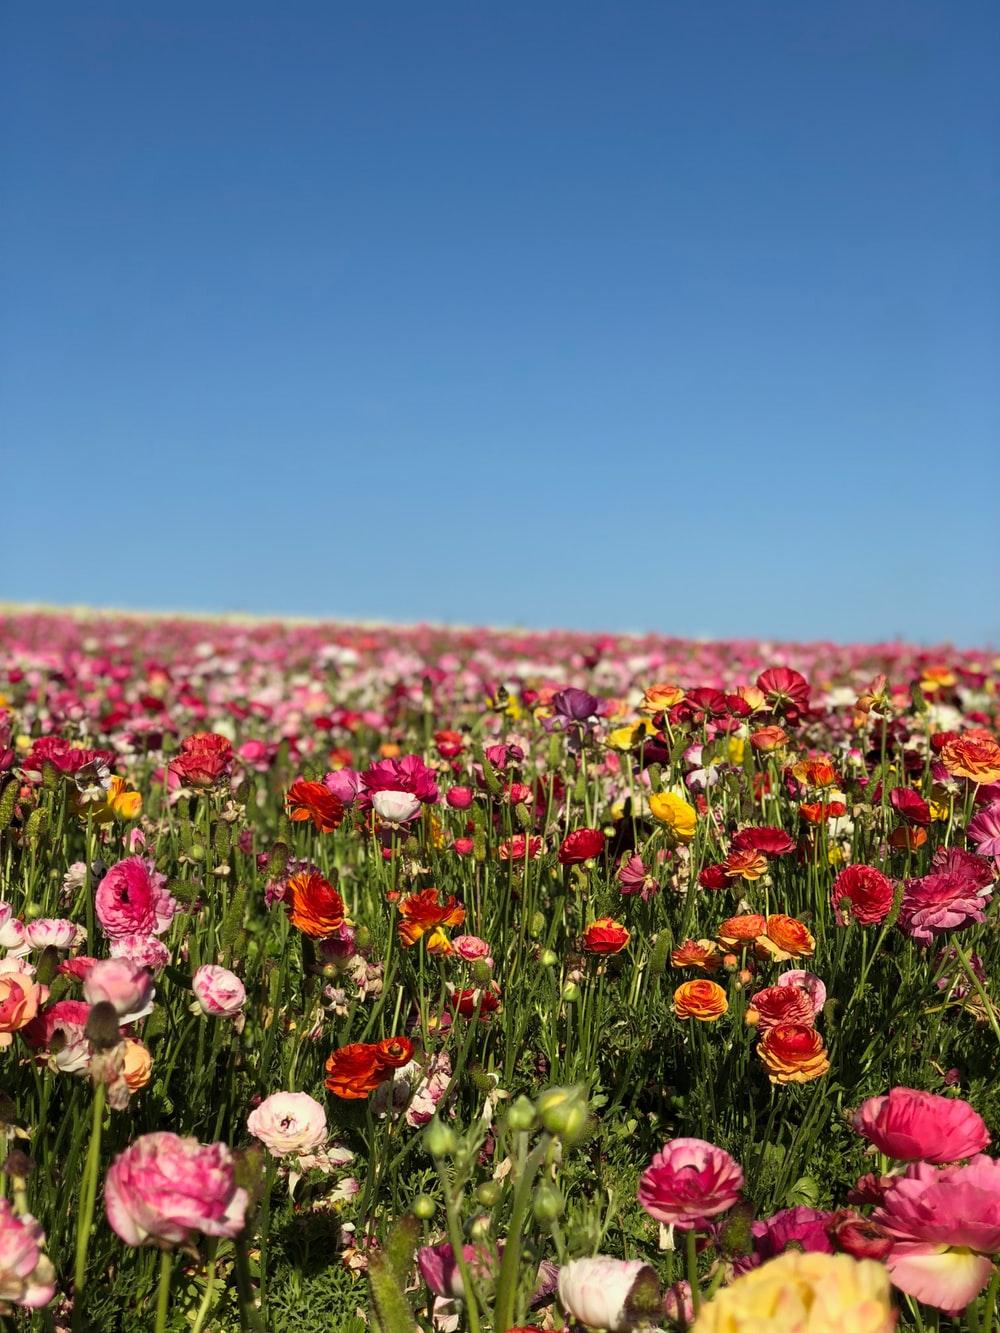 500+ Flower Field Pictures [HD]